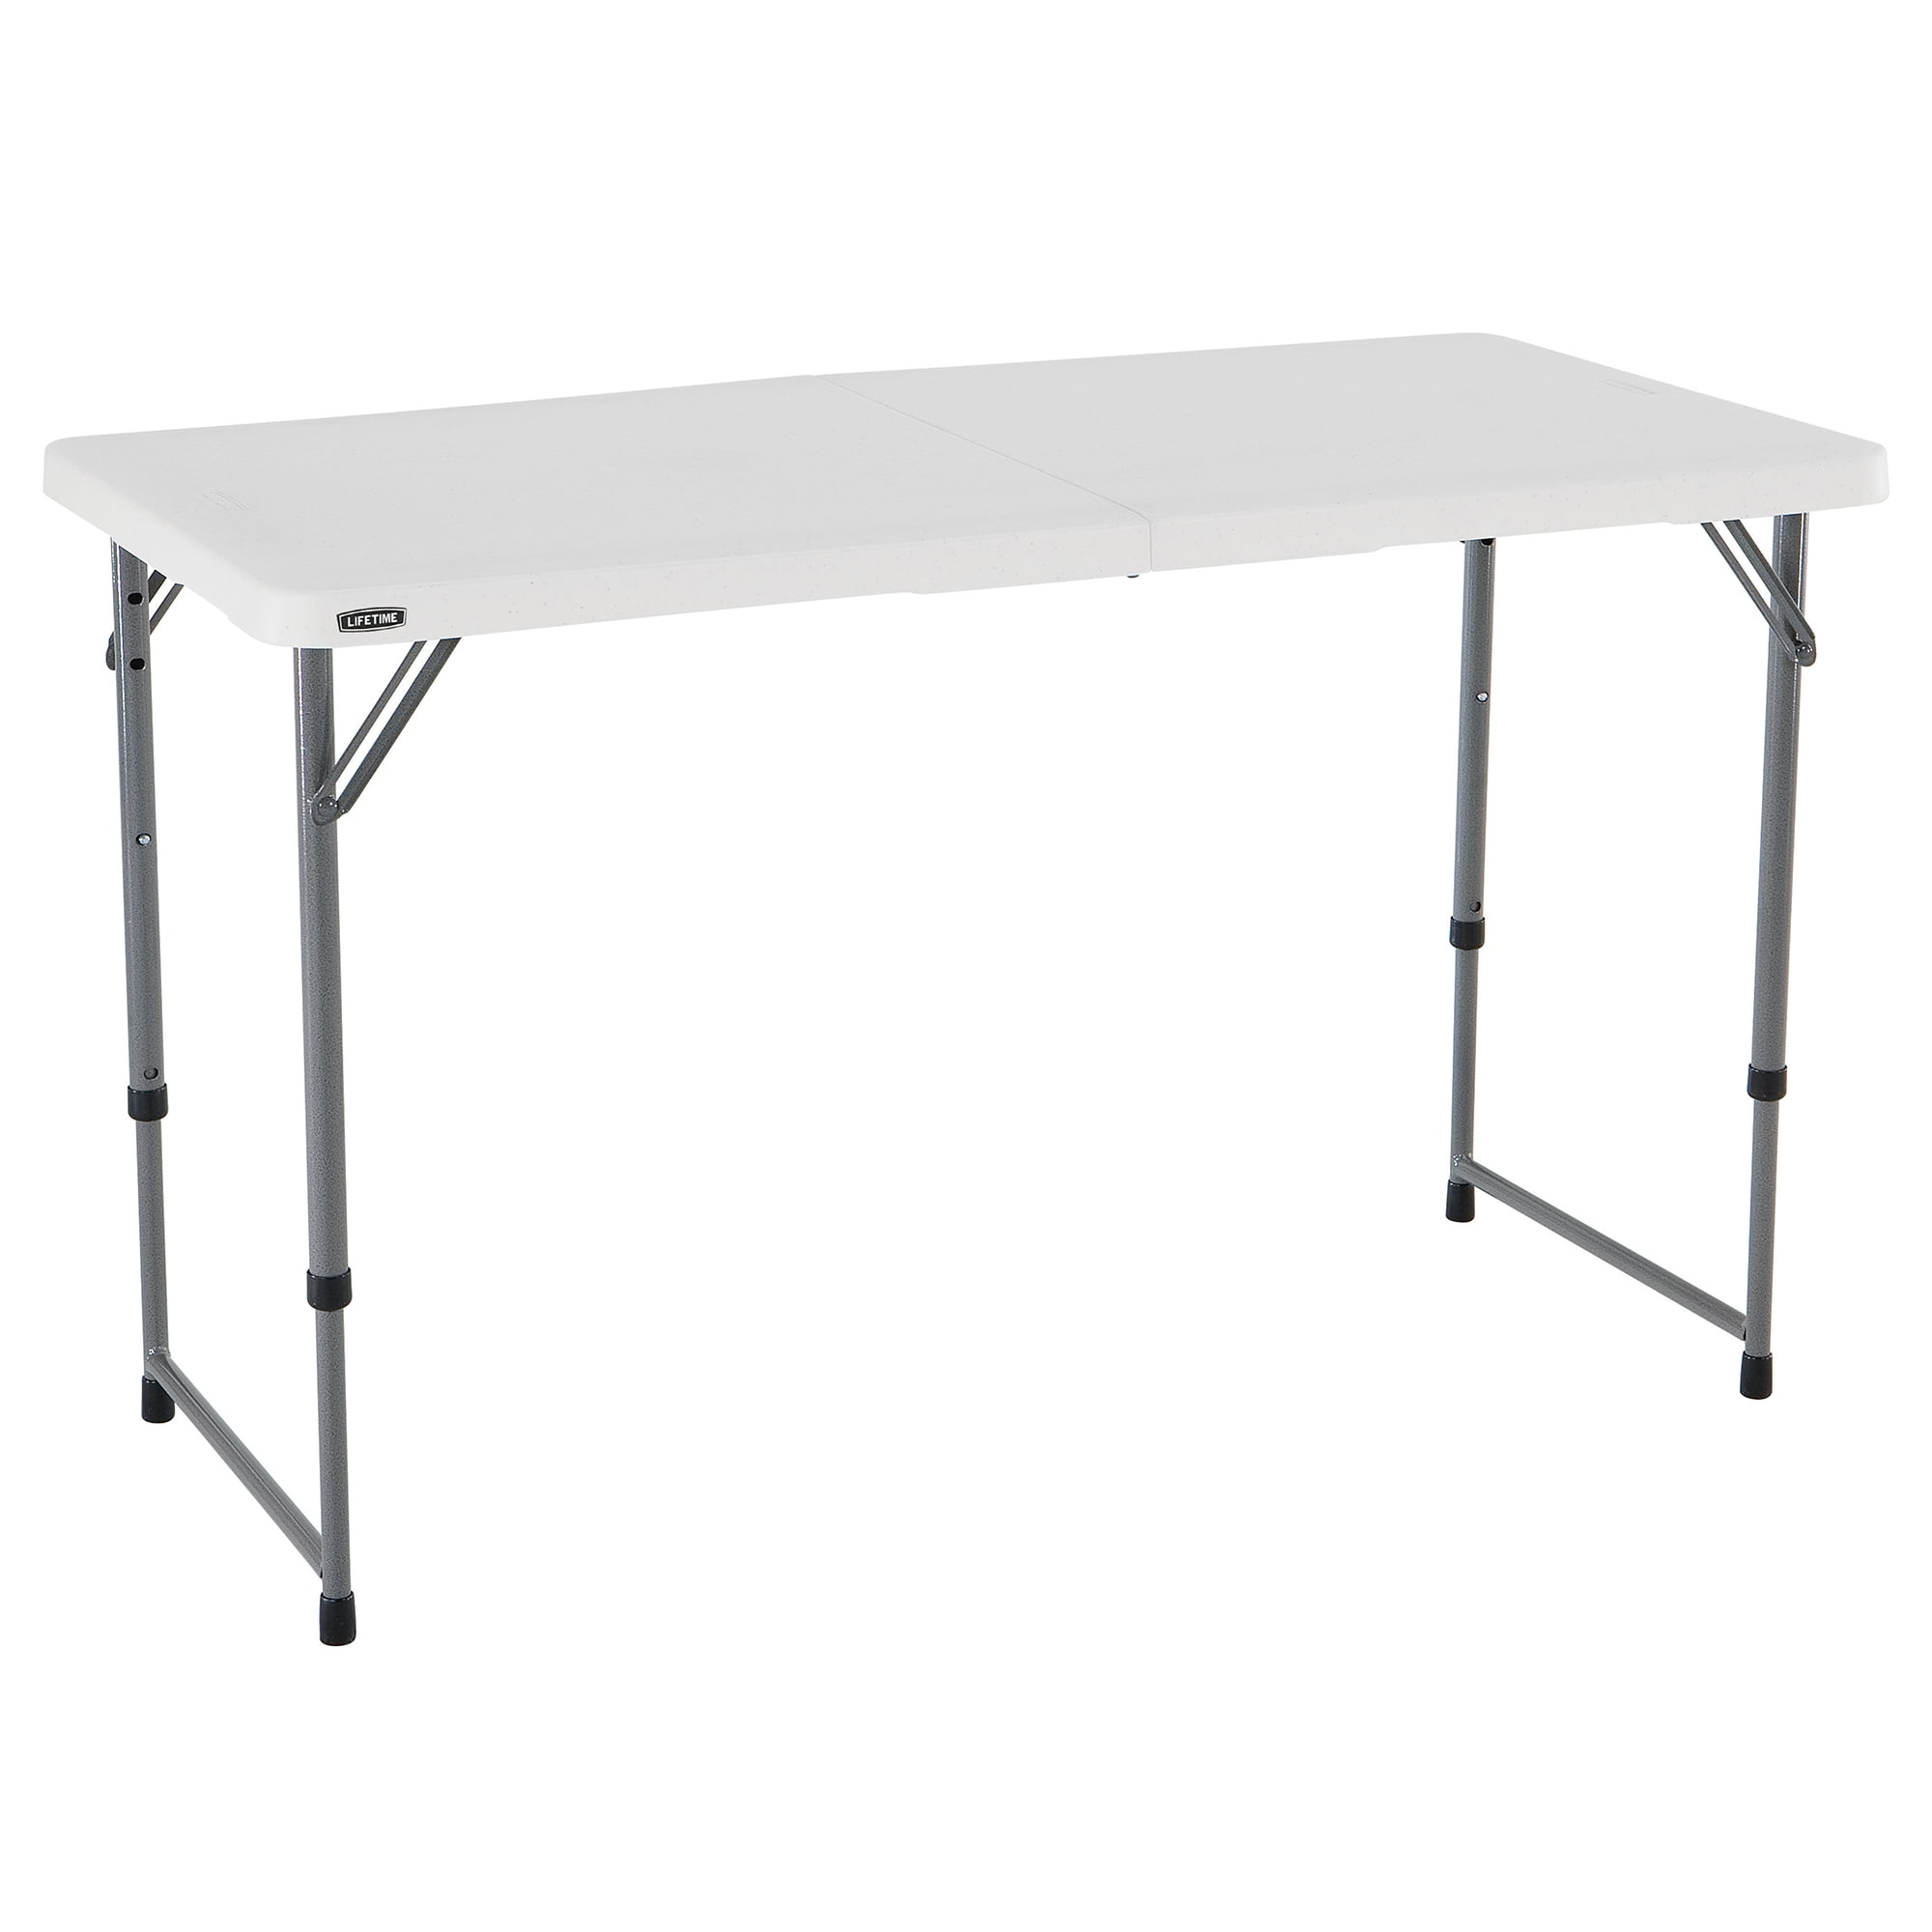 soges Portable Folding Table Camping Buffet Table Wedding table Garden table Party Table,HP-76-1